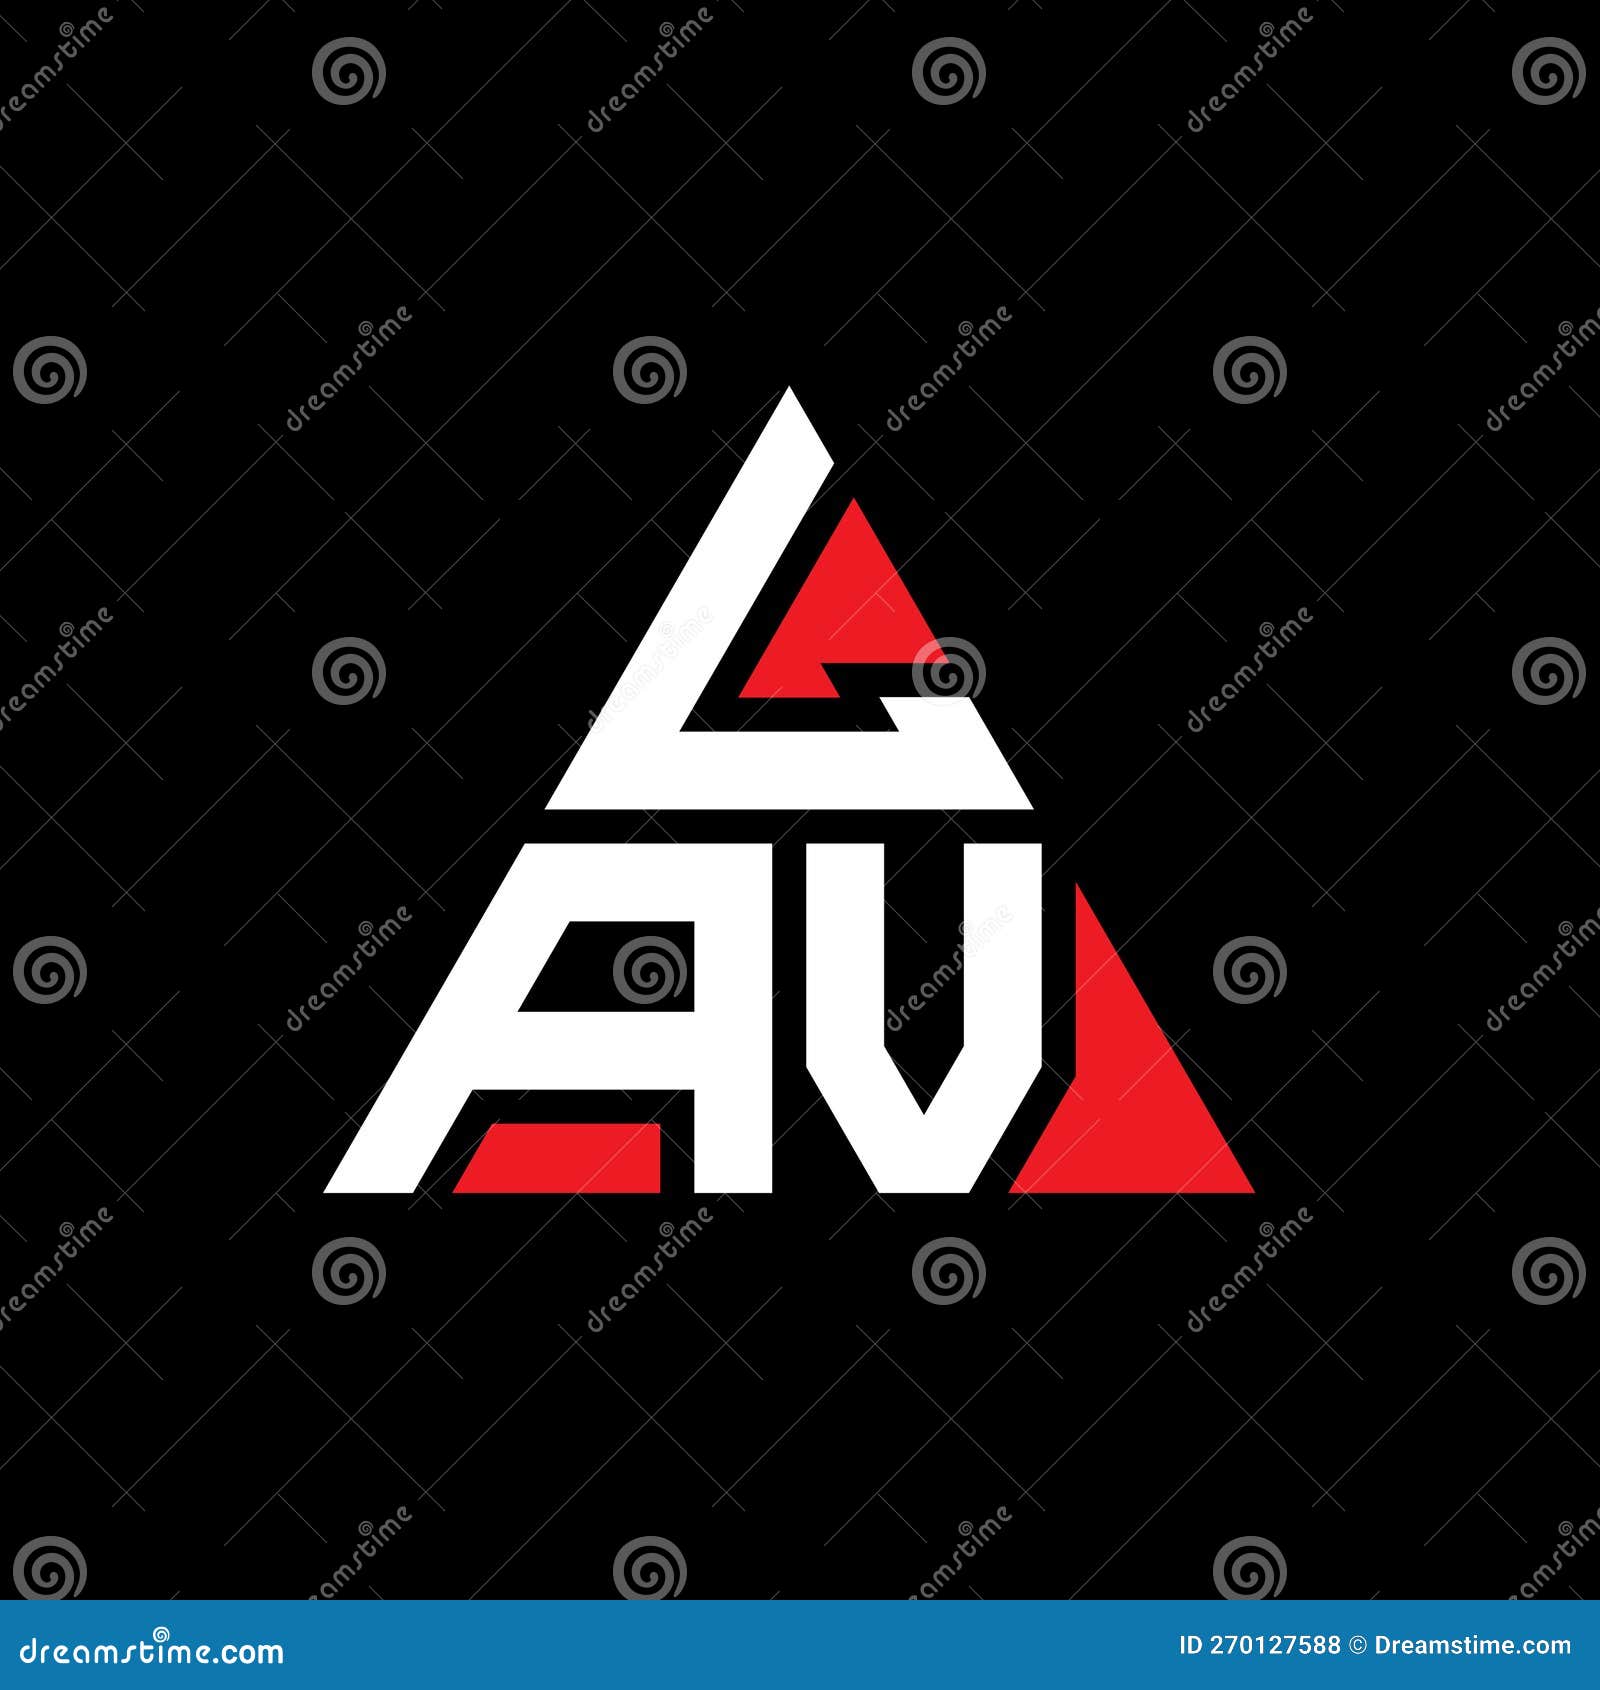 lav triangle letter logo  with triangle . lav triangle logo  monogram. lav triangle  logo template with red